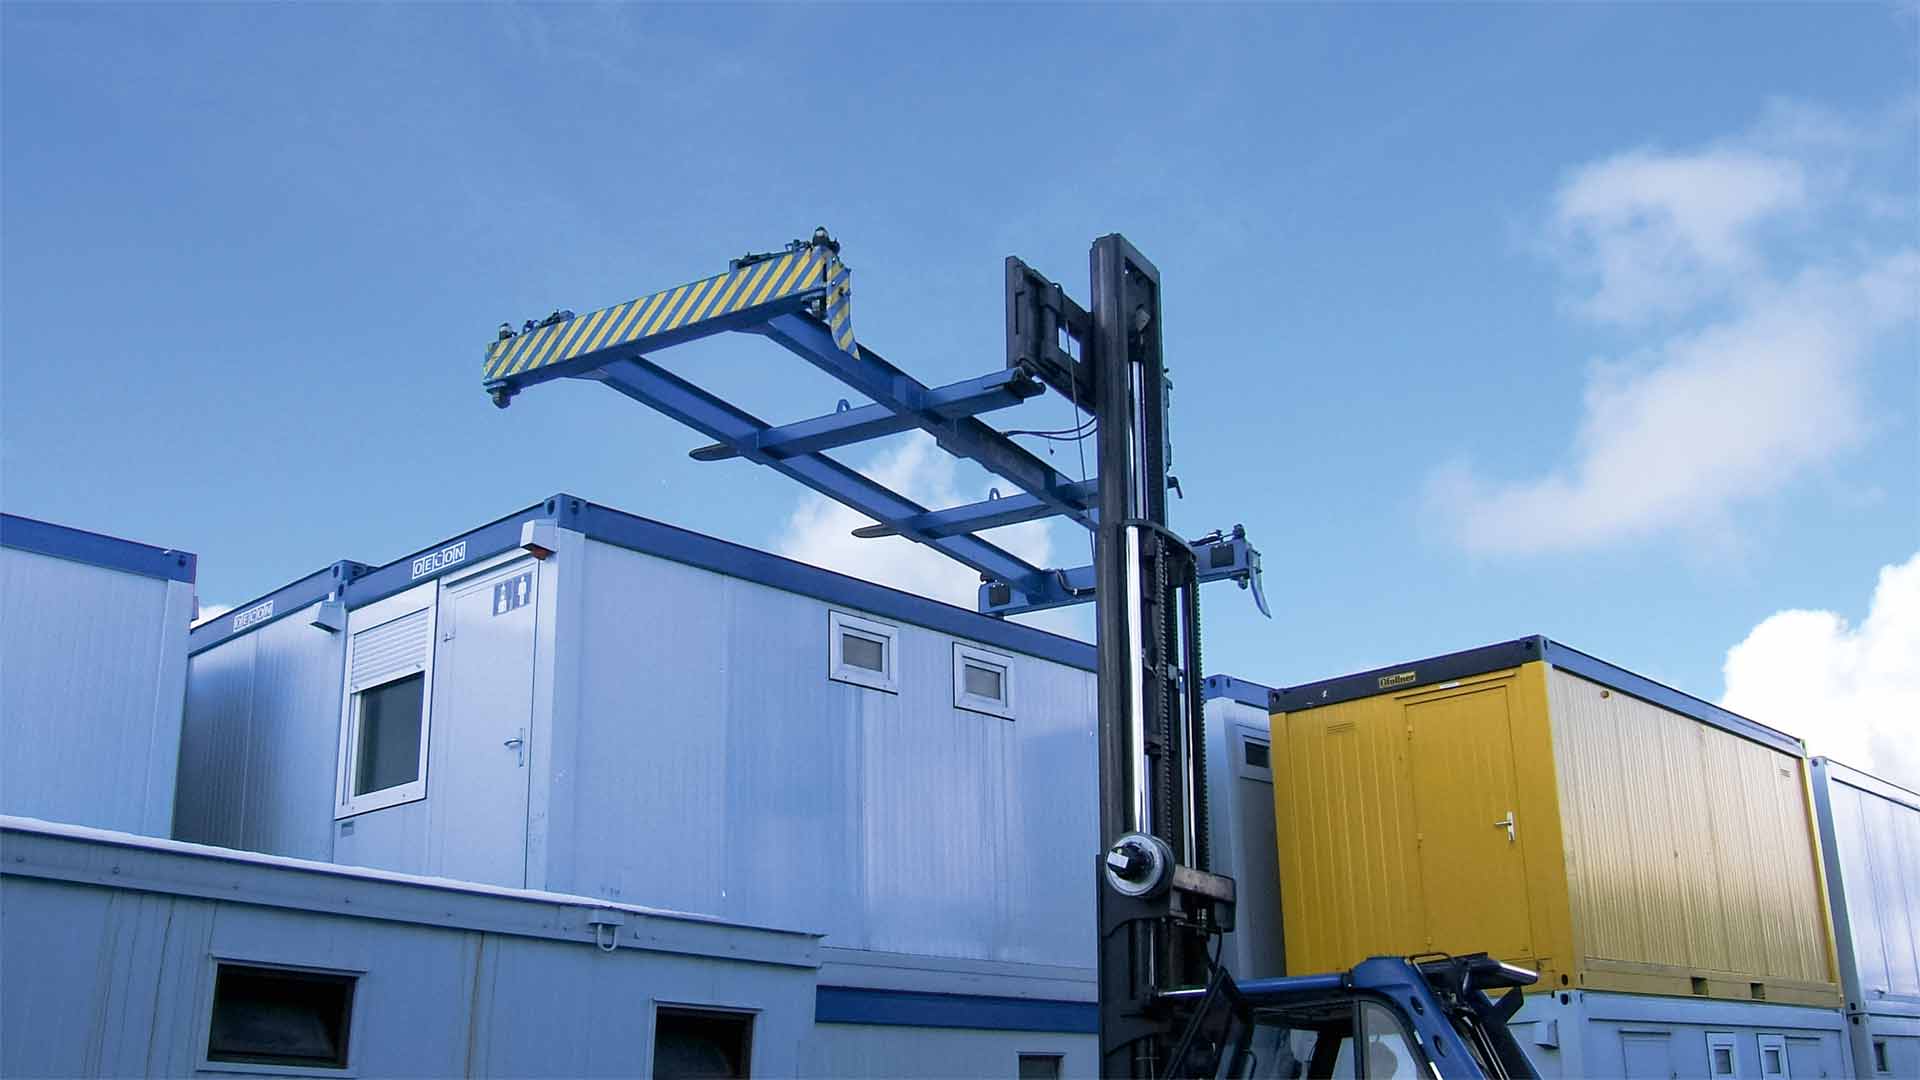 An extended blue container spreader hovers above colourful, stacked containers